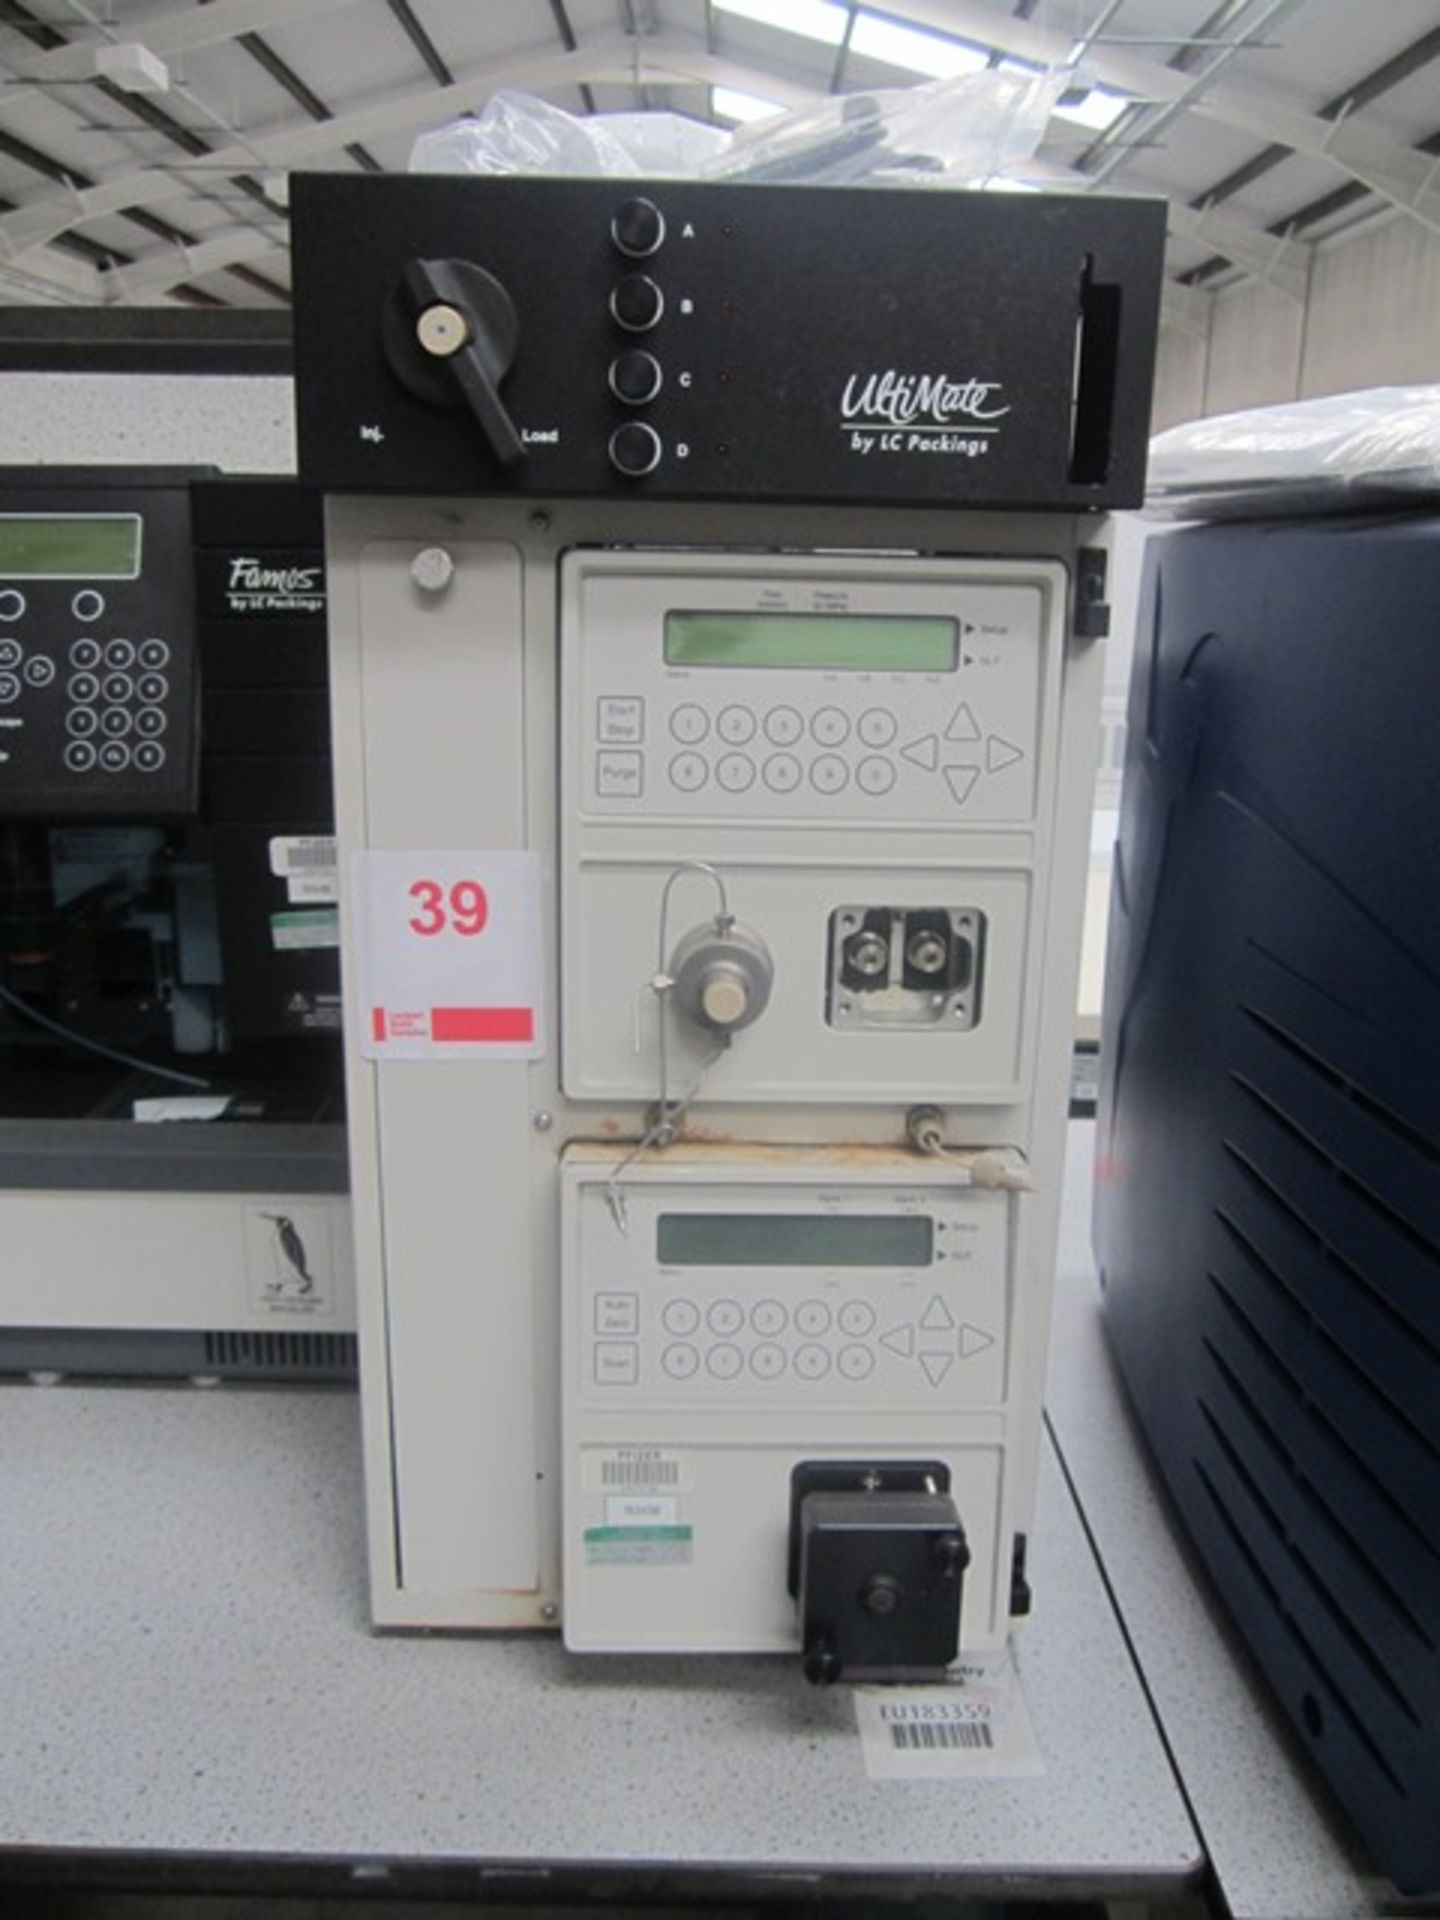 LC Packings Ultimate HPLC with power lead (height 700mm x width 900mm x depth 563mm)